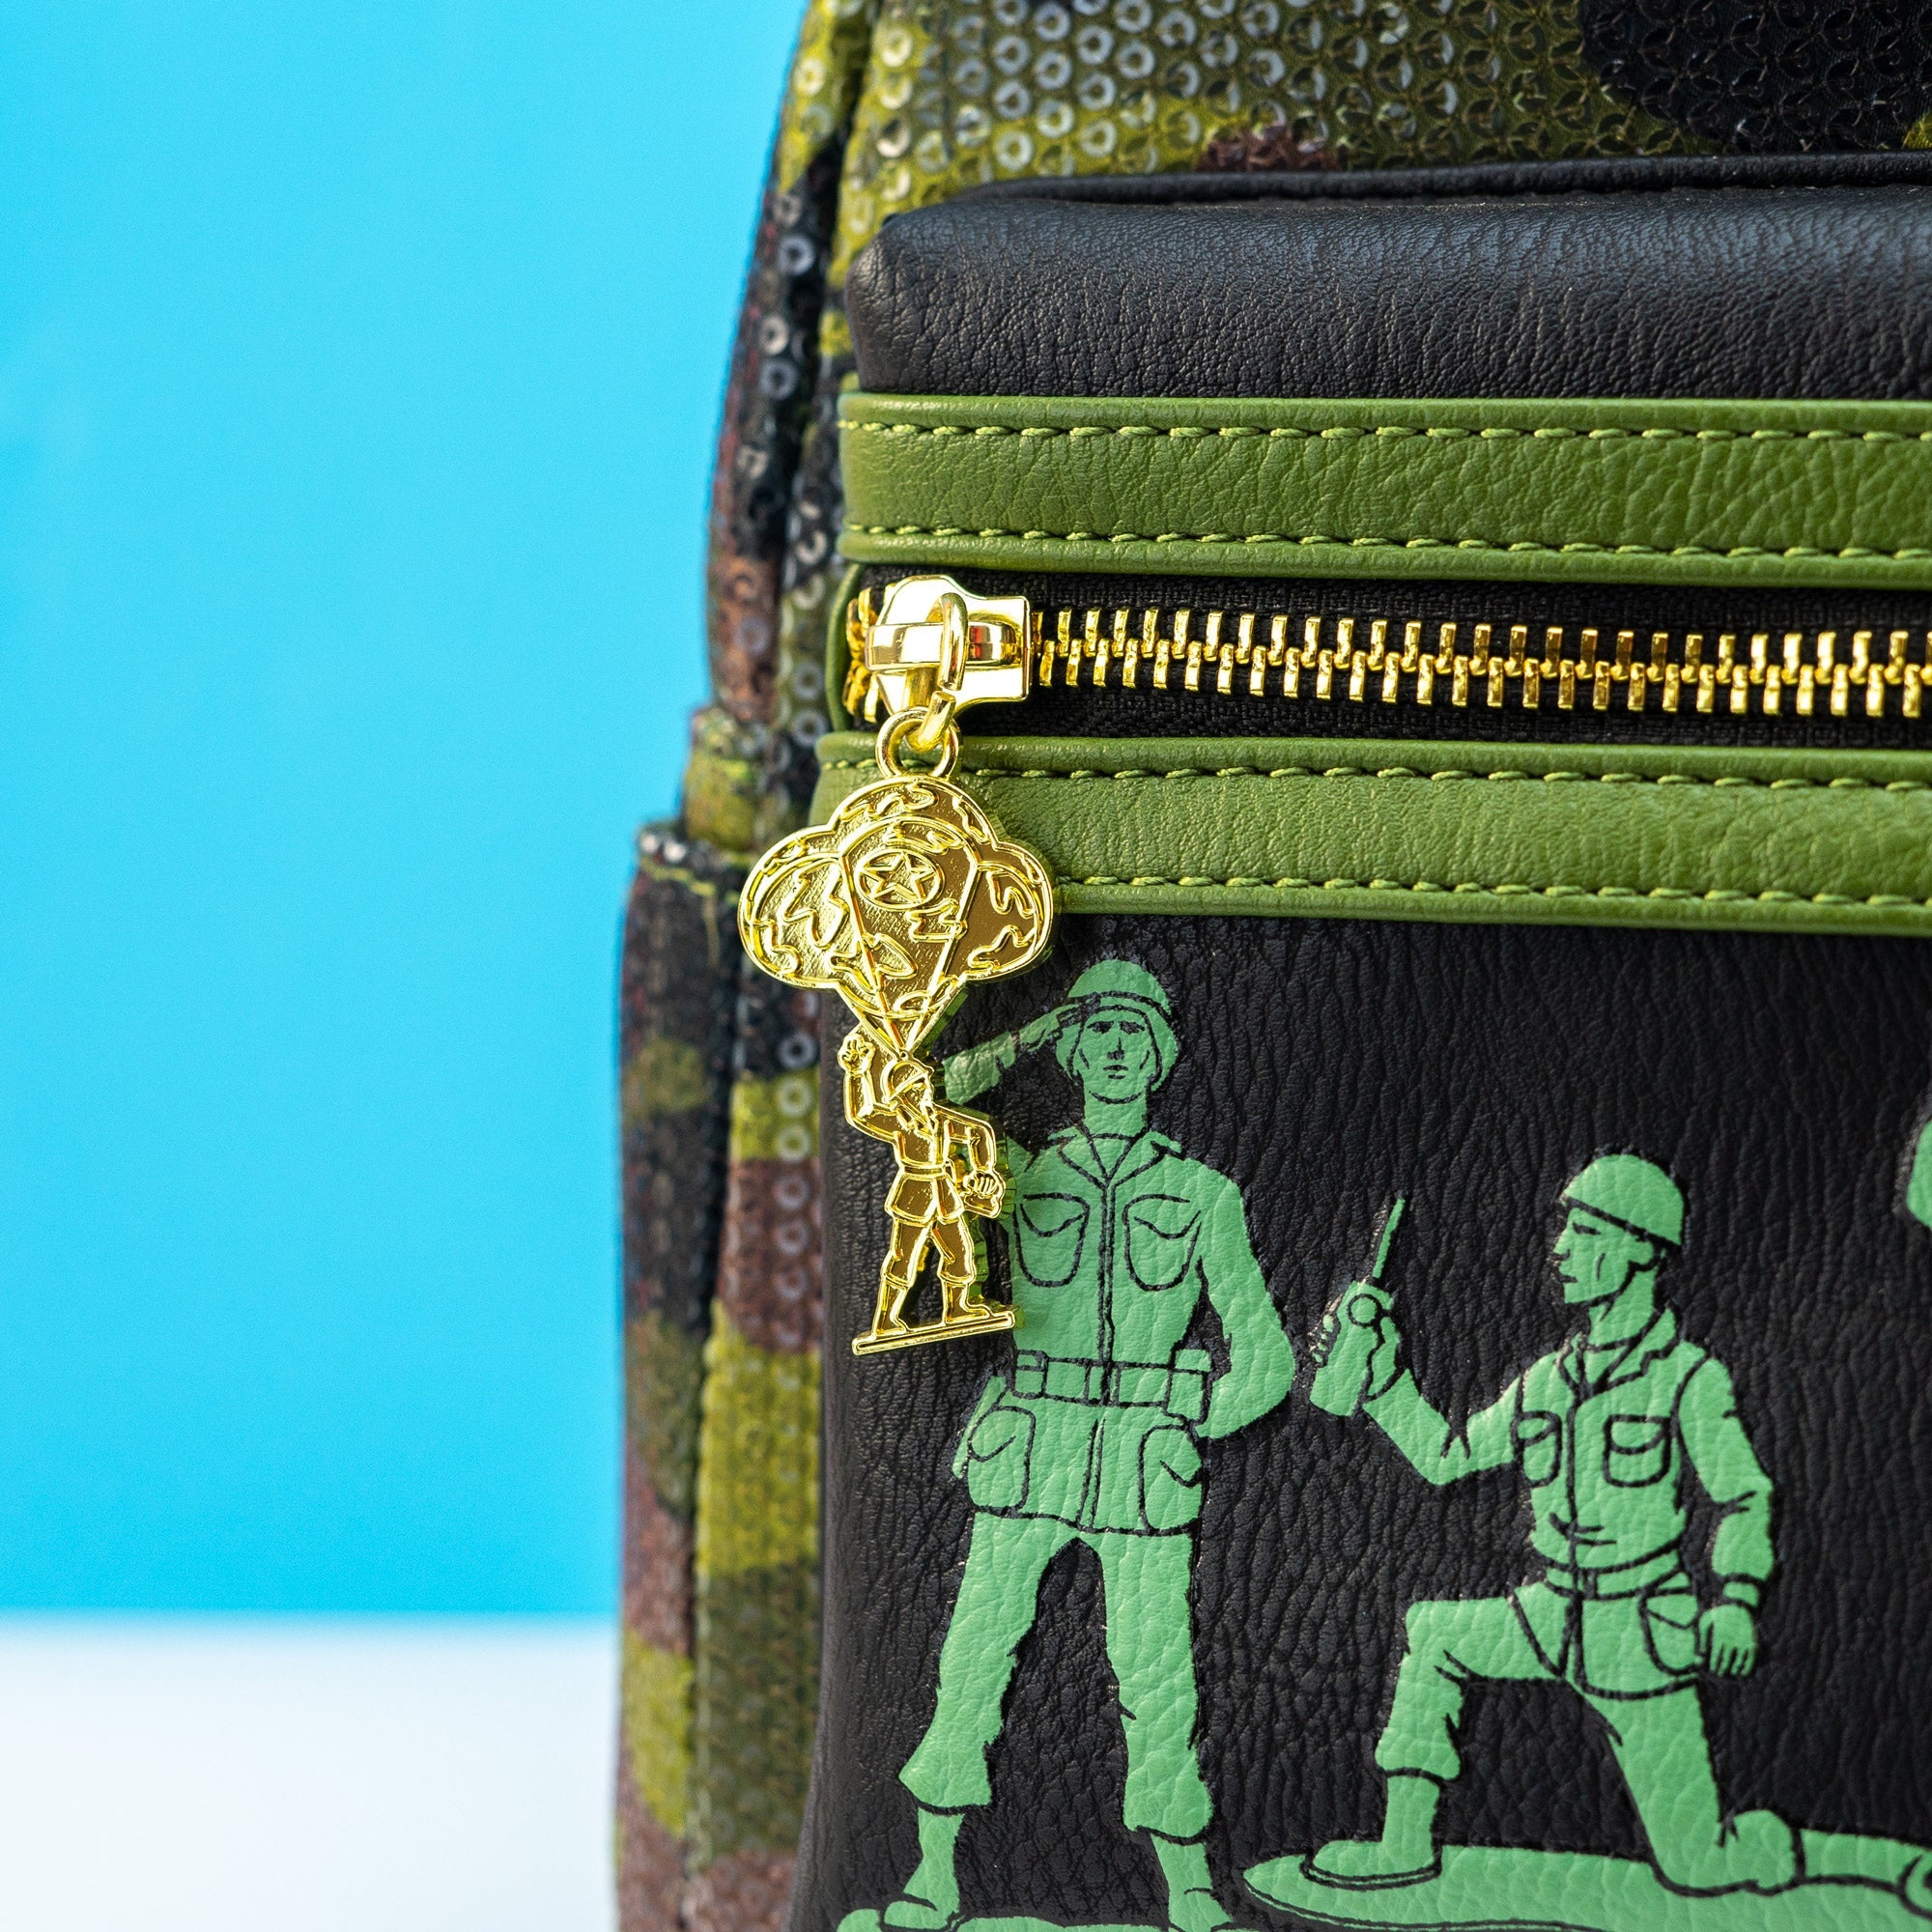 Loungefly x Disney Pixar Toy Story Army Men Mini Backpack - GeekCore